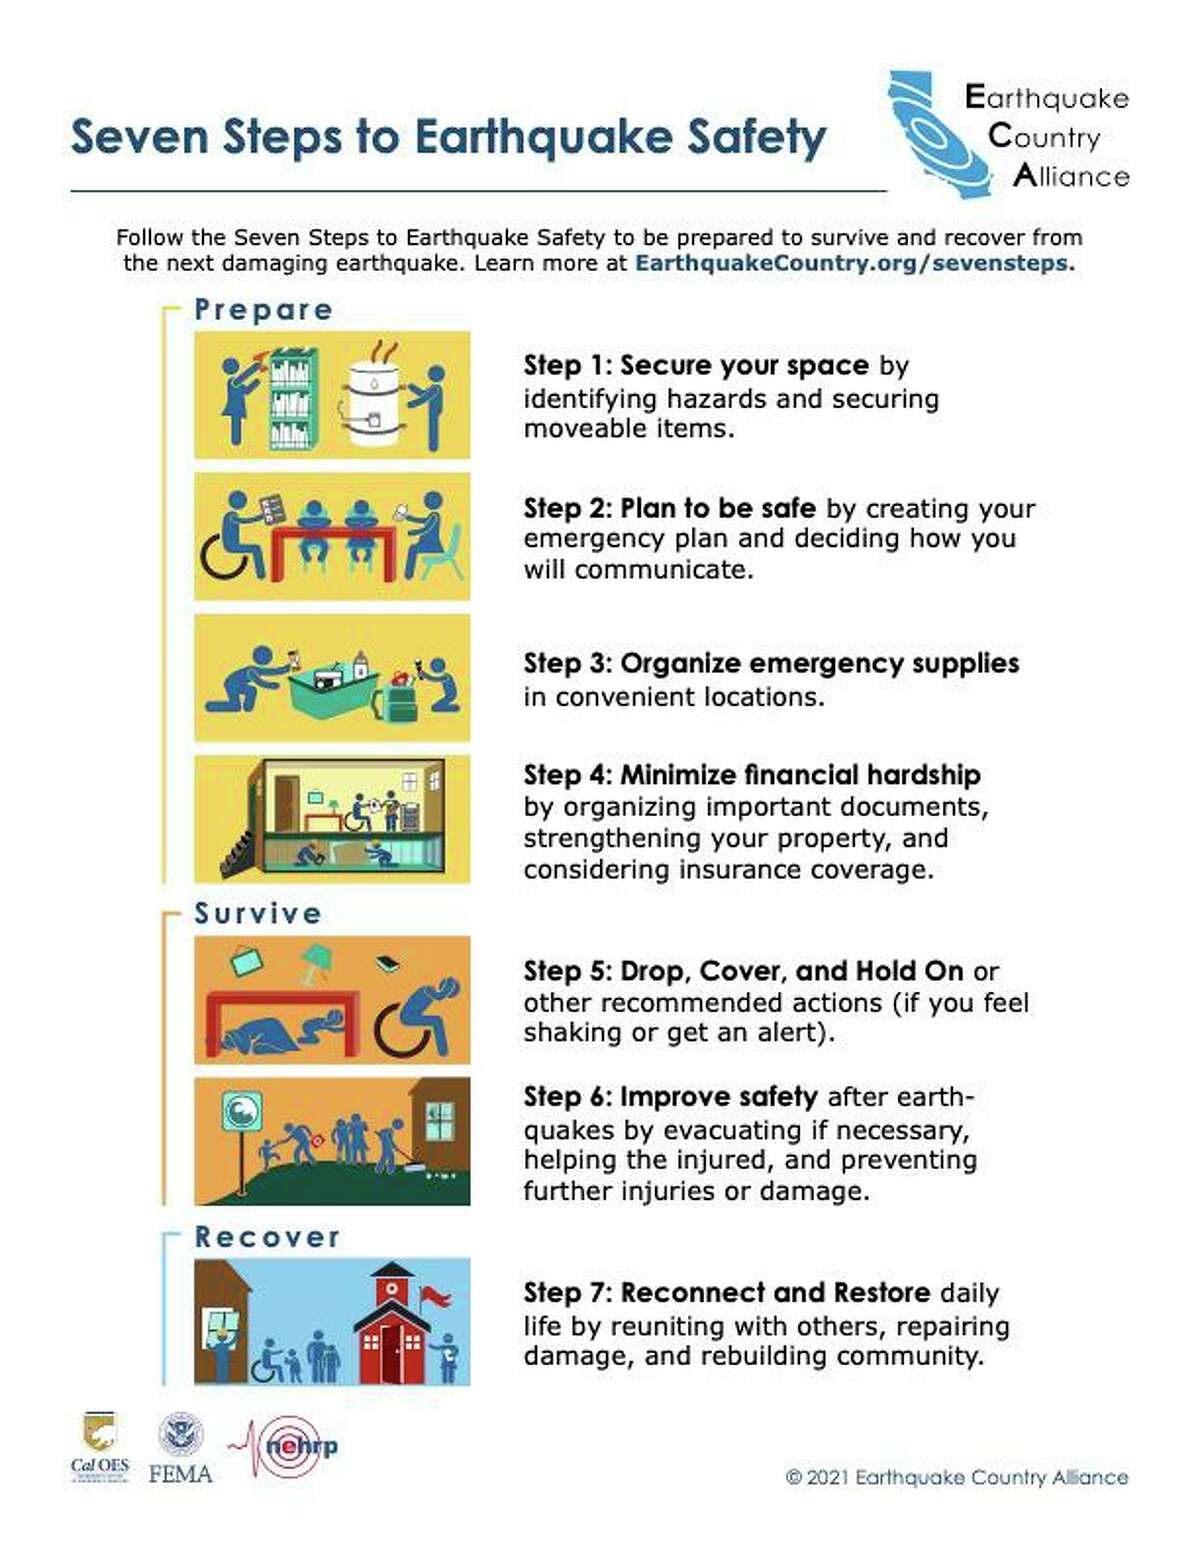 A diagram shows the seven steps for earthquake safety.